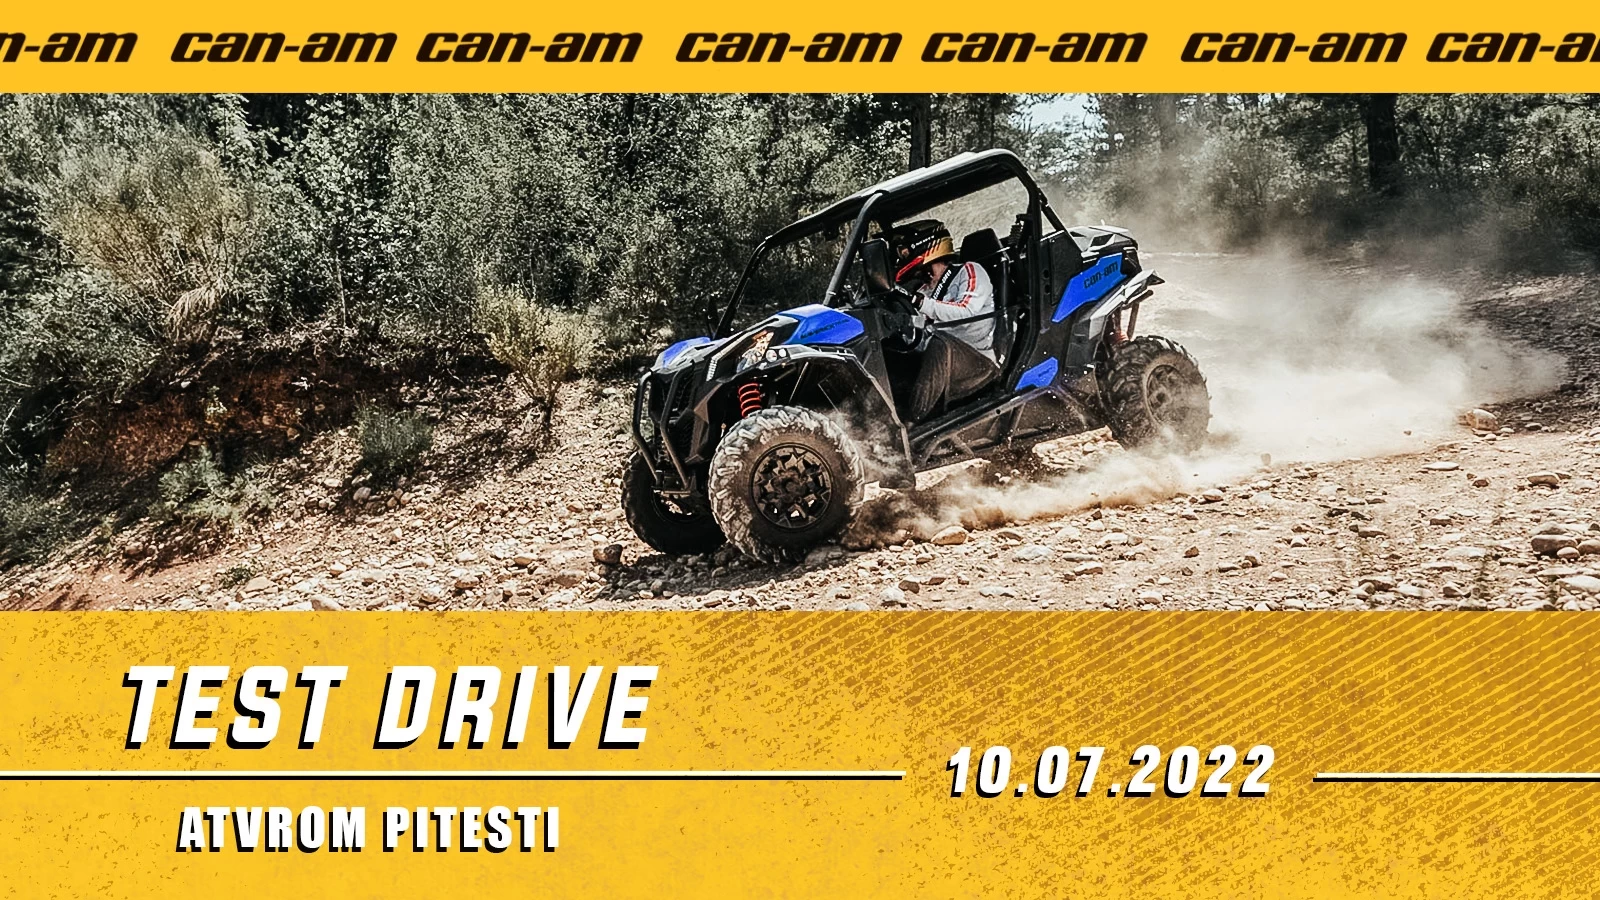 TEST DRIVE CAN-AM